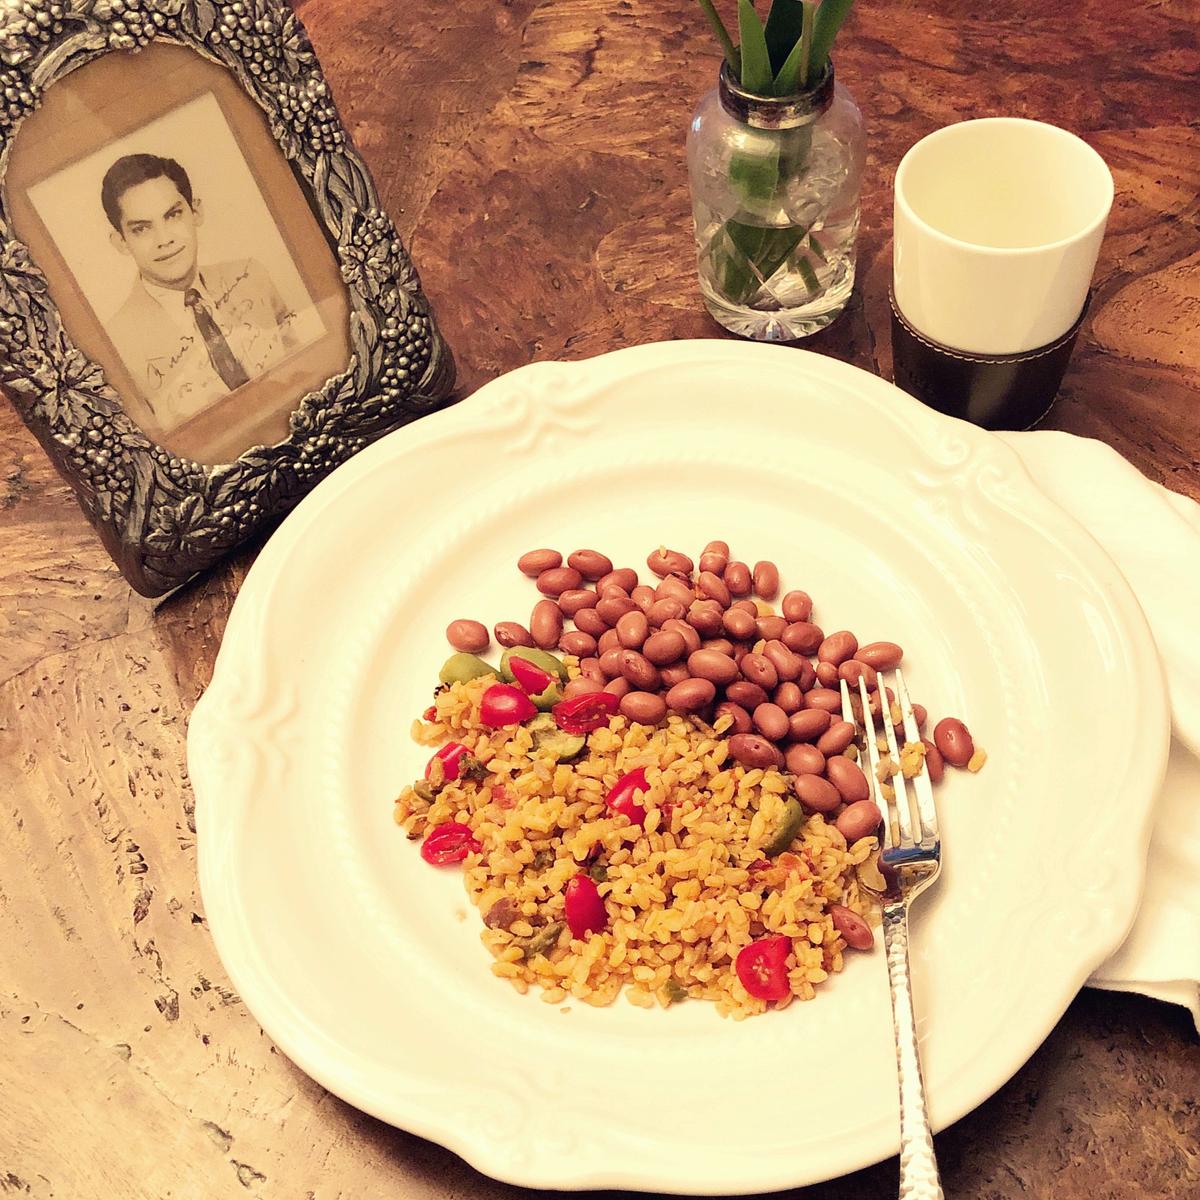 The author's father's rice and beans, along with her favorite photo of her father. It includes a sweet inscription to his parents, sent with letters home in 1955. (Courtesy of Cara Colon-McLauchlan)